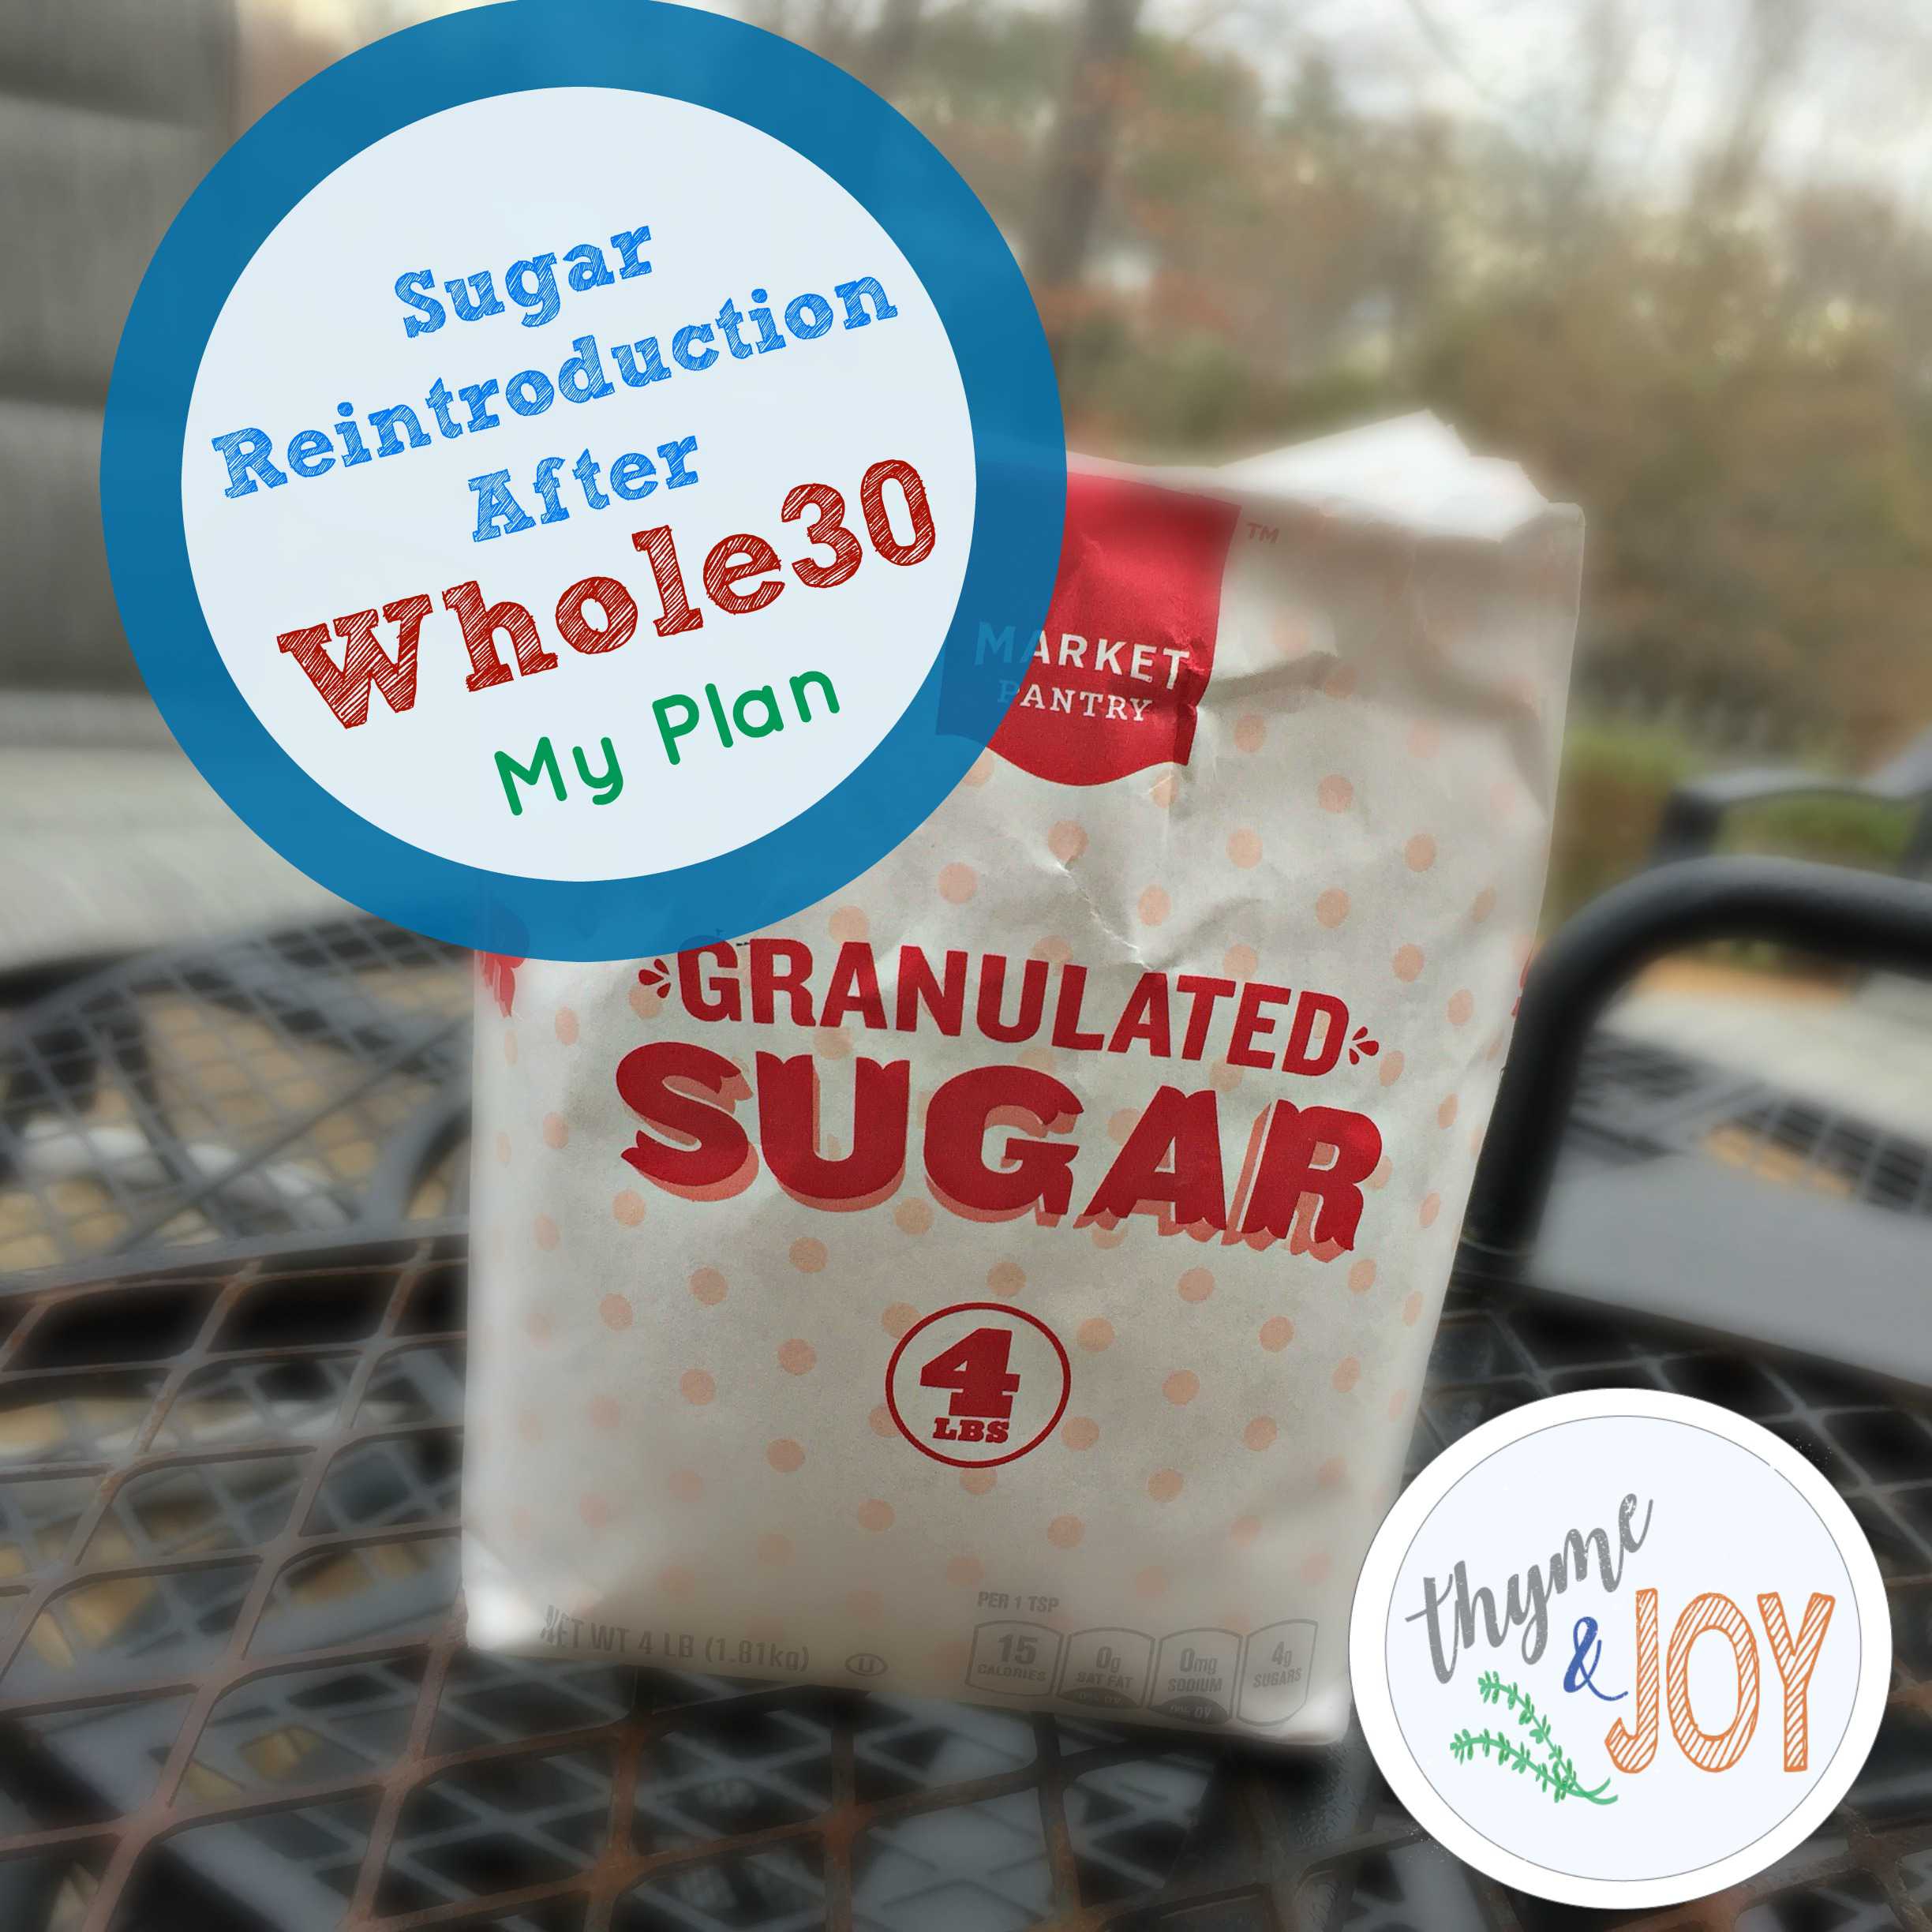 Sugar Reintroduction after Whole30